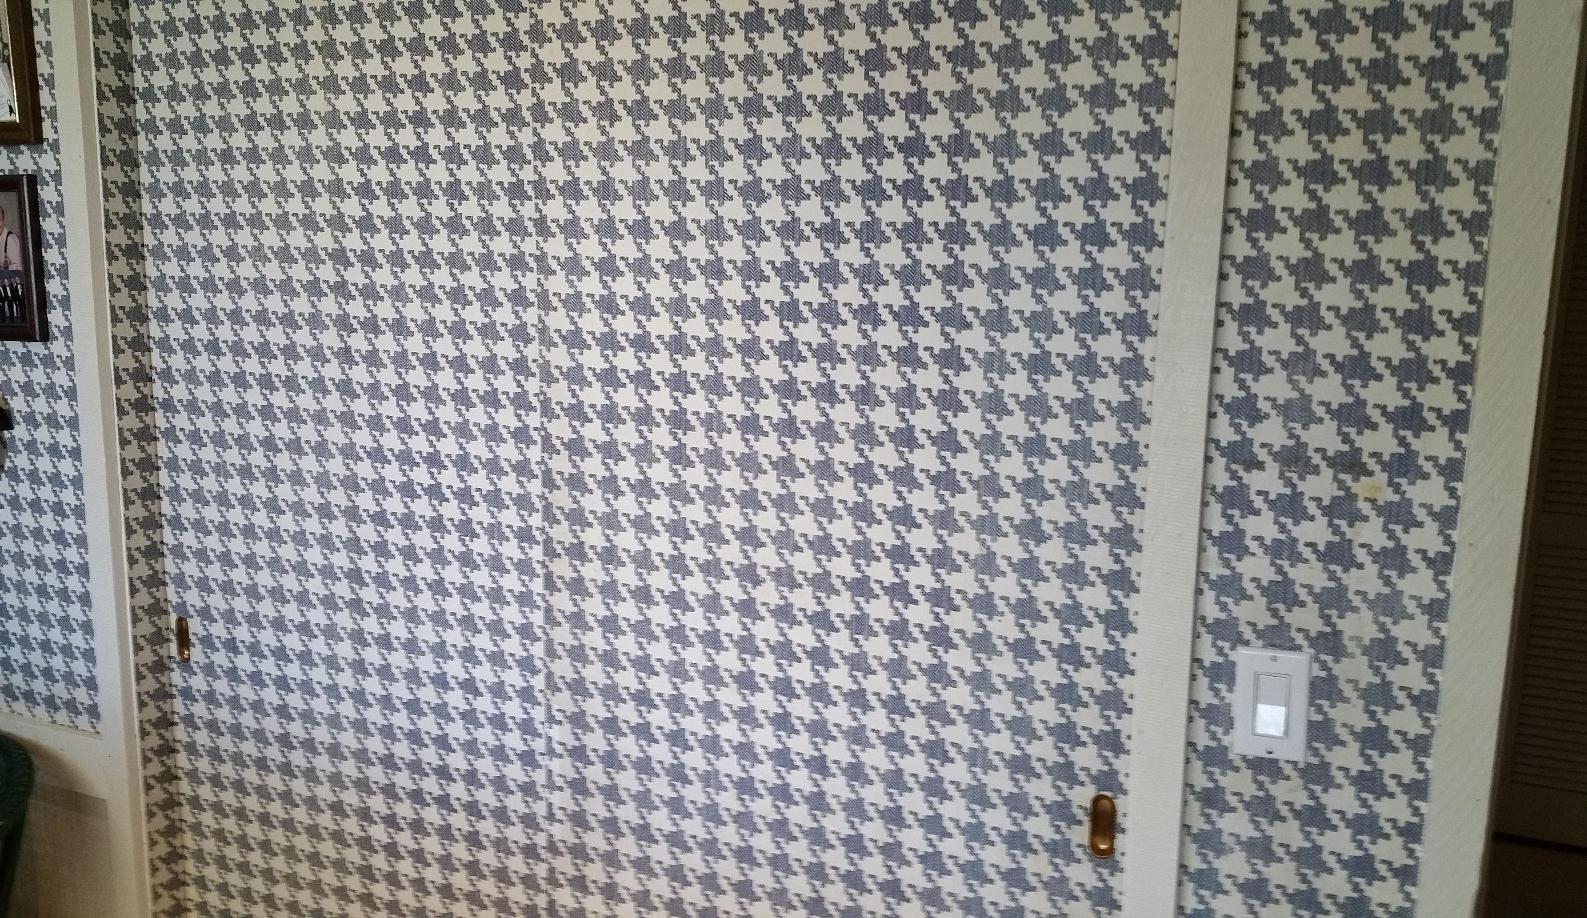 Outdated Old Patterned Wallpaper Houndstooth Phoenix Arizona Home